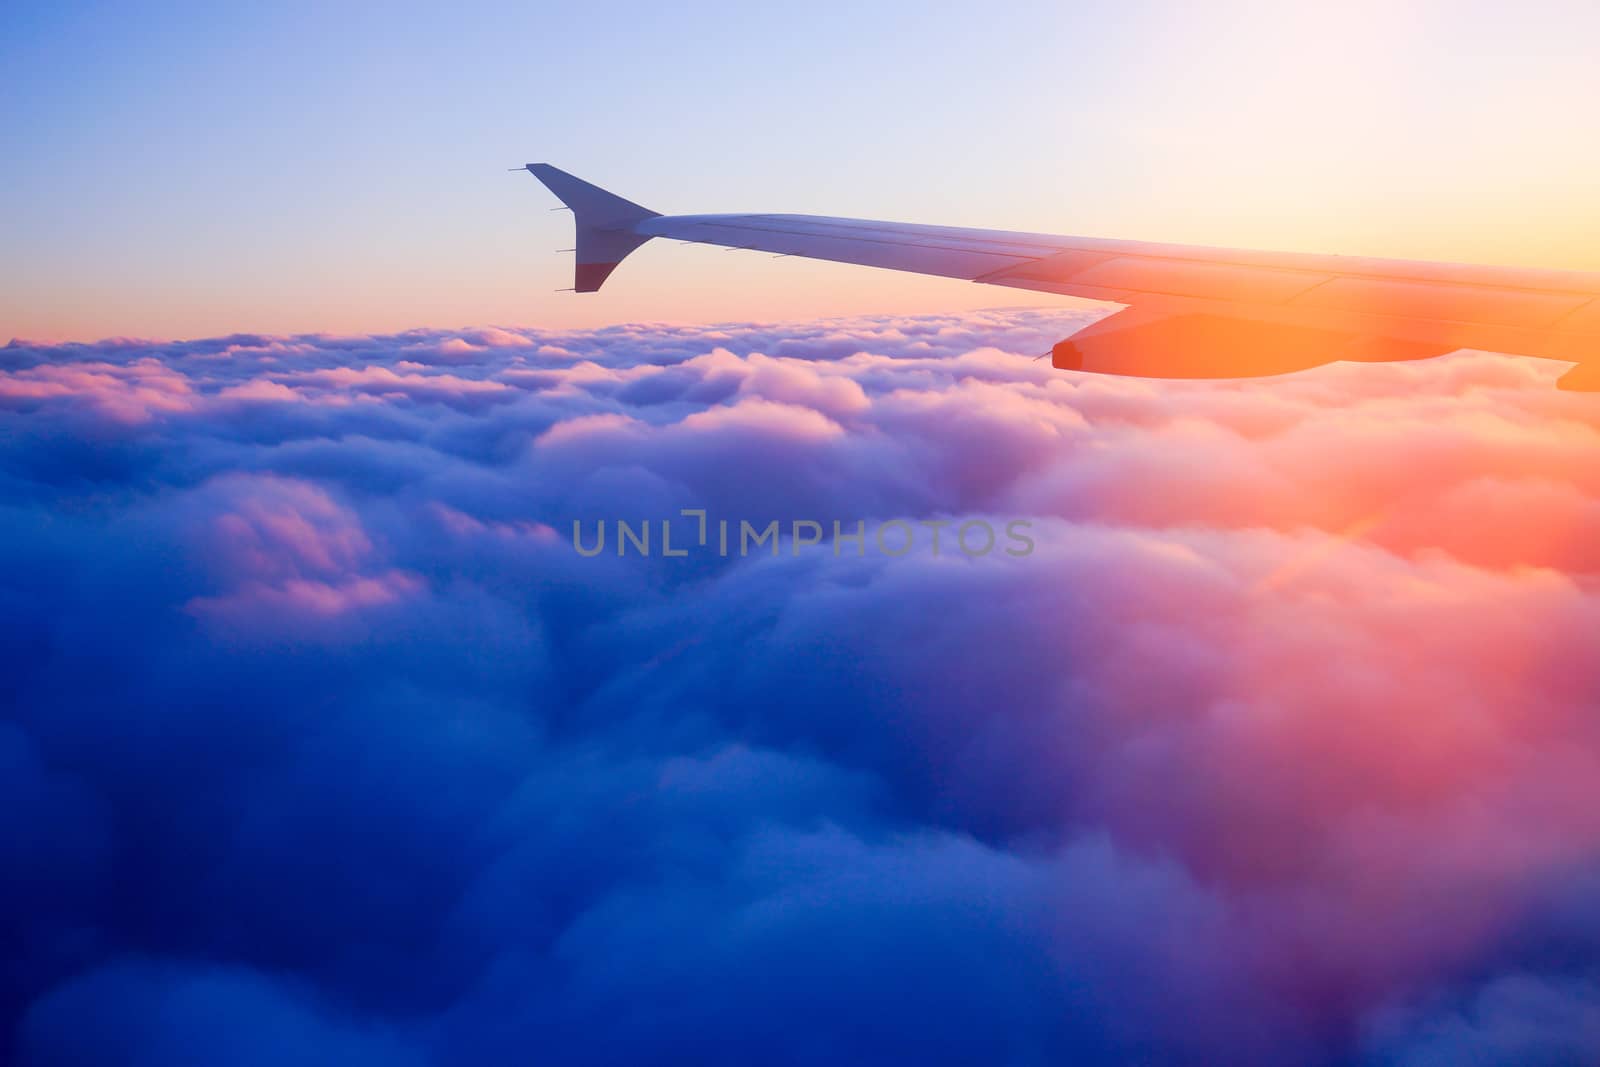 Airplane Wing in Flight from window, sunset sky by Alicephoto